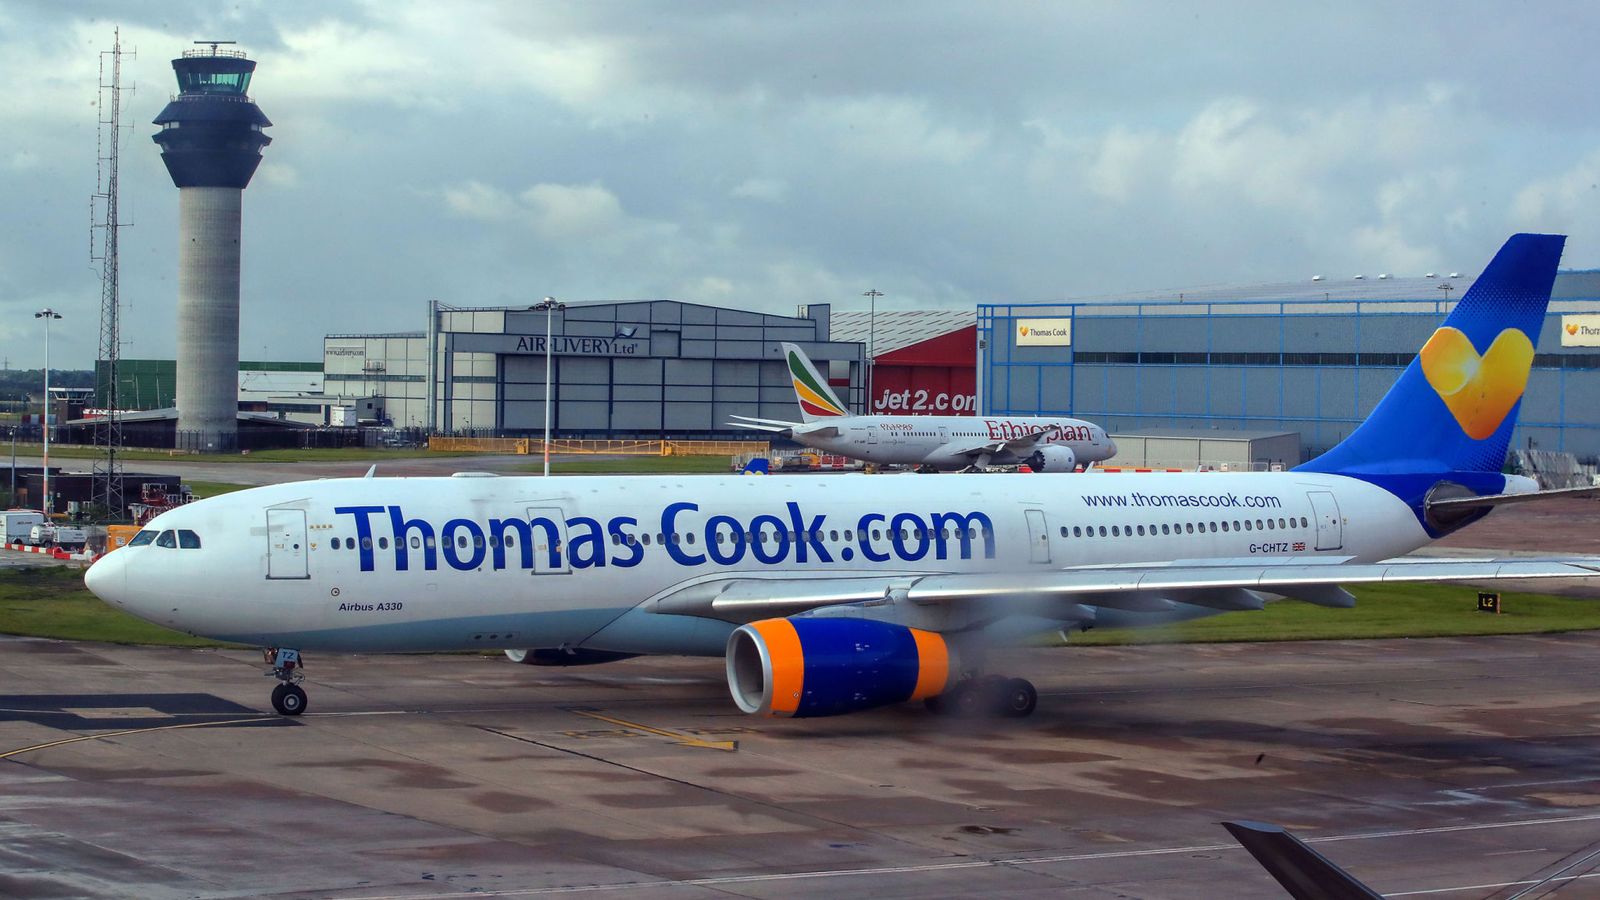 Travel group Thomas Cook battles for survival ahead of Monday deadline